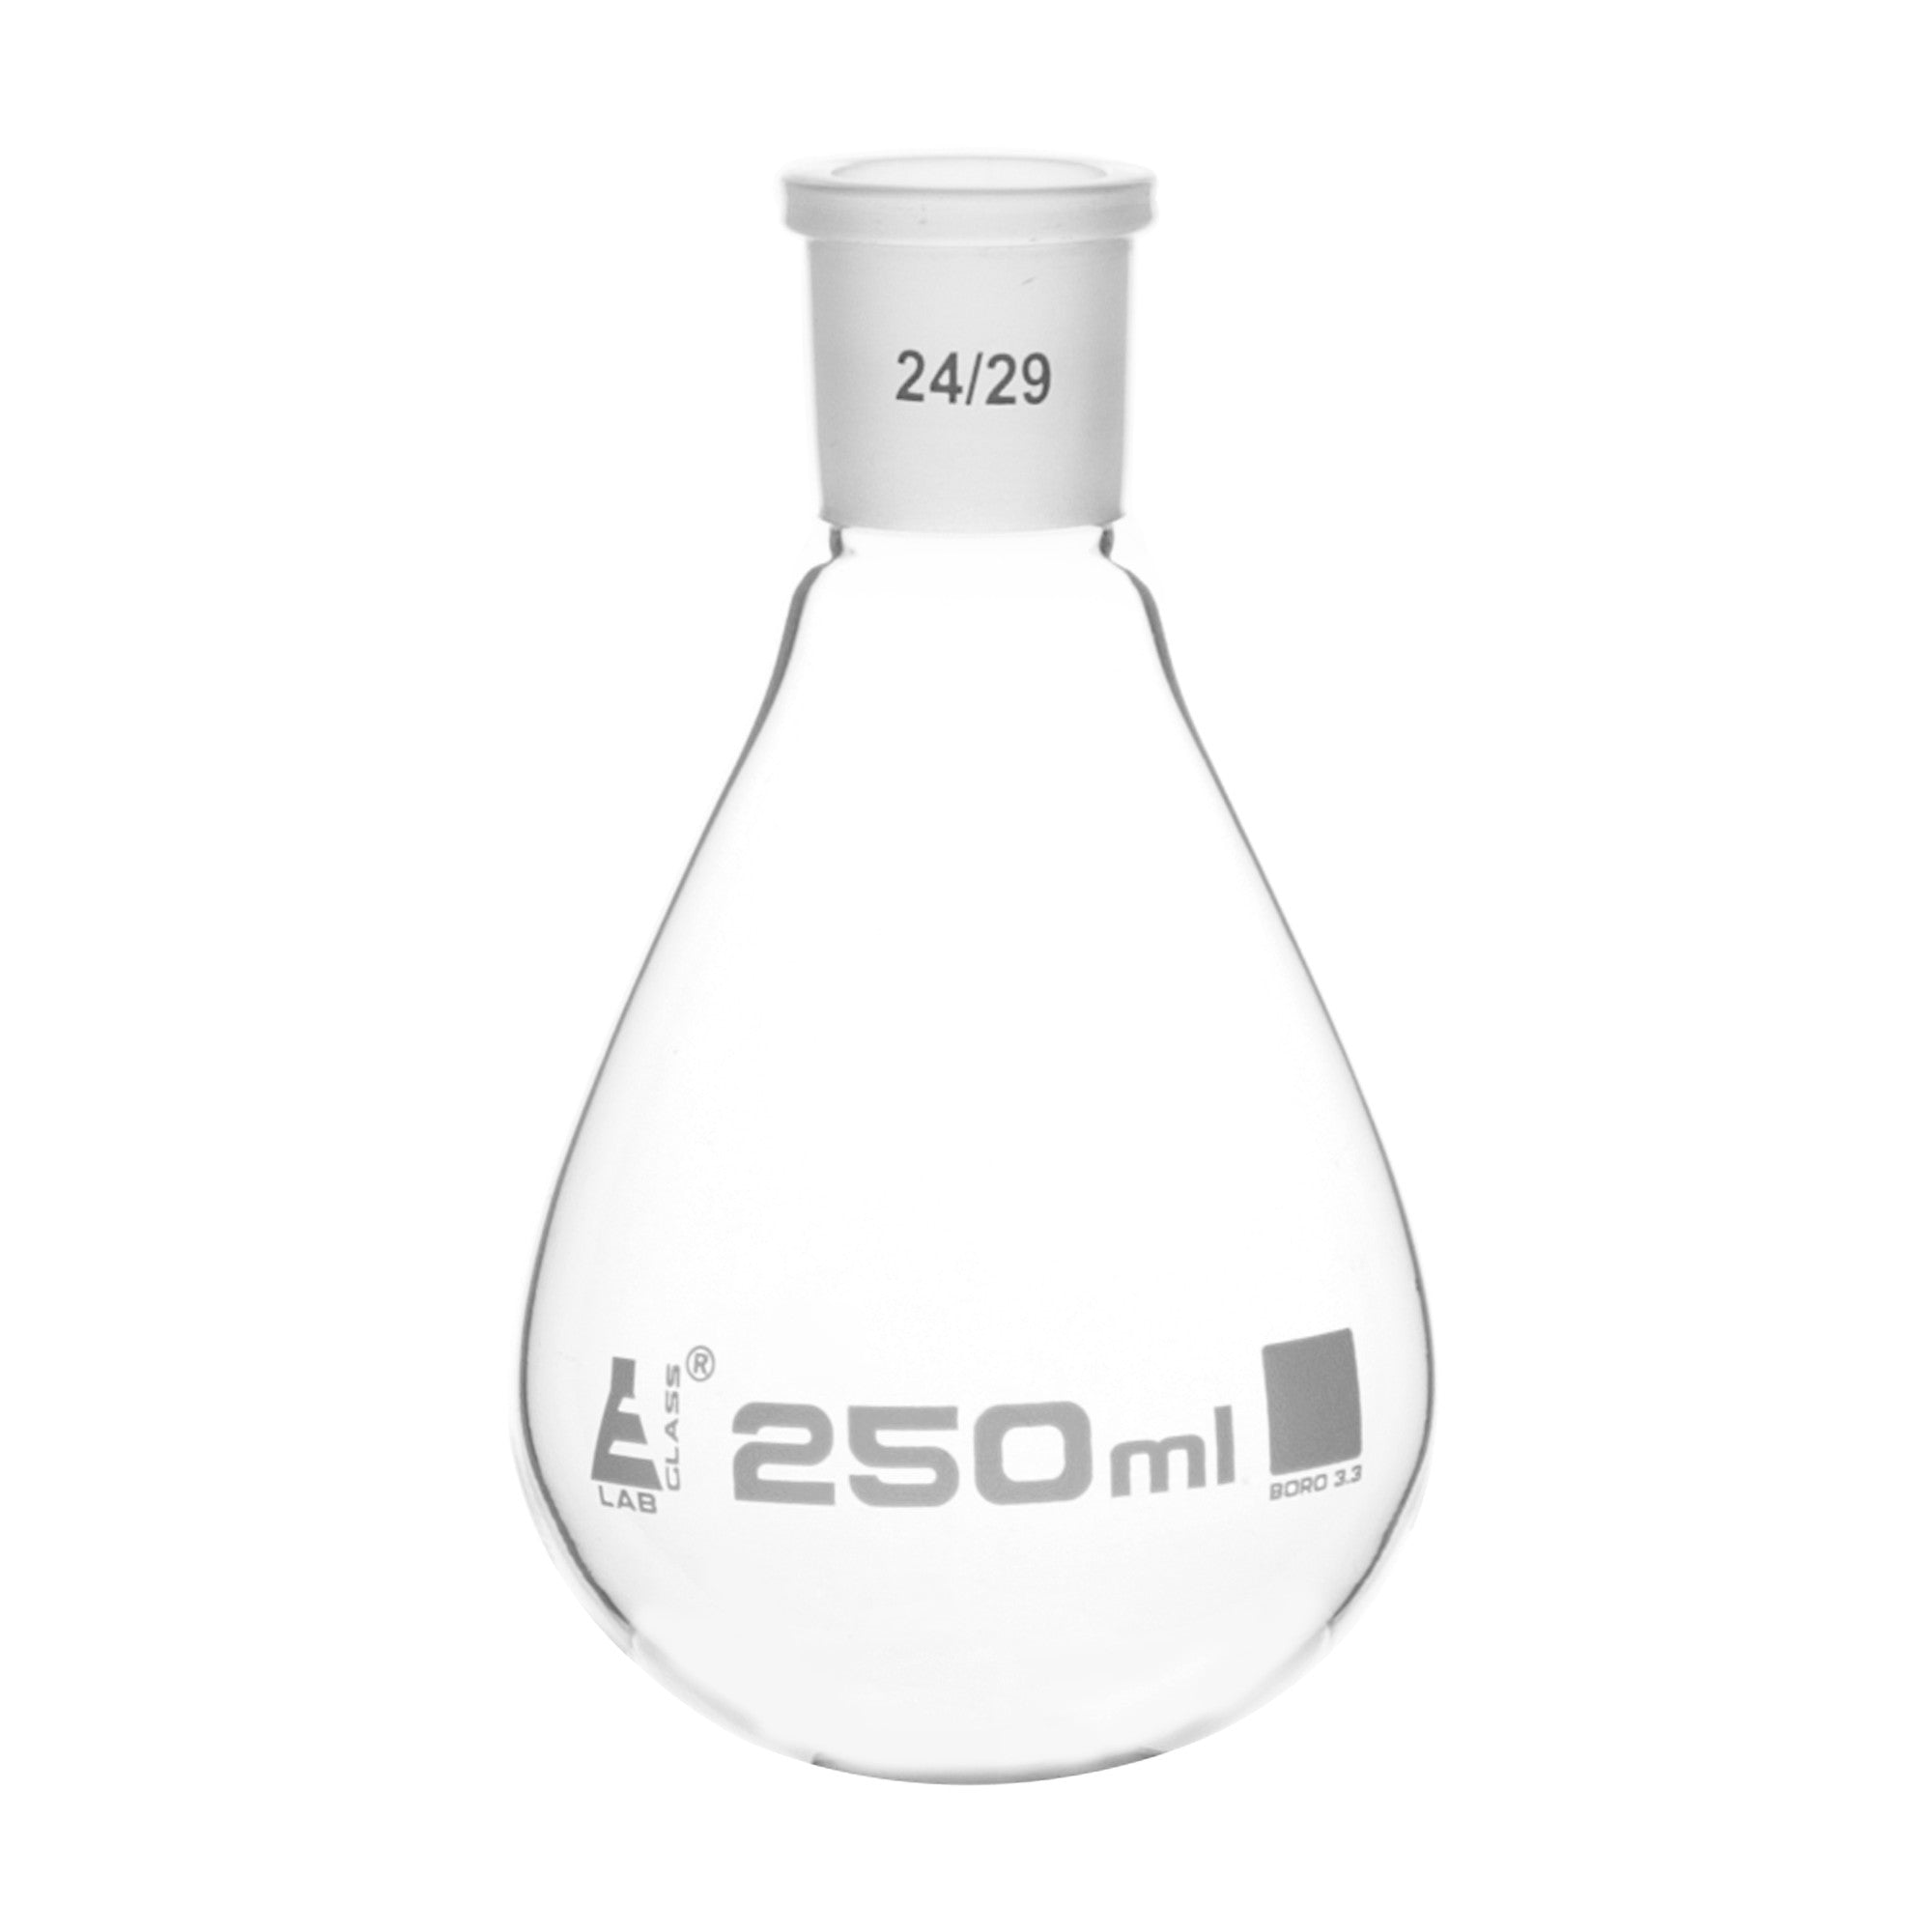 Borosilicate Evaporating Flask with Standard Ground Joint (24/29), 250 ml, Autoclavable